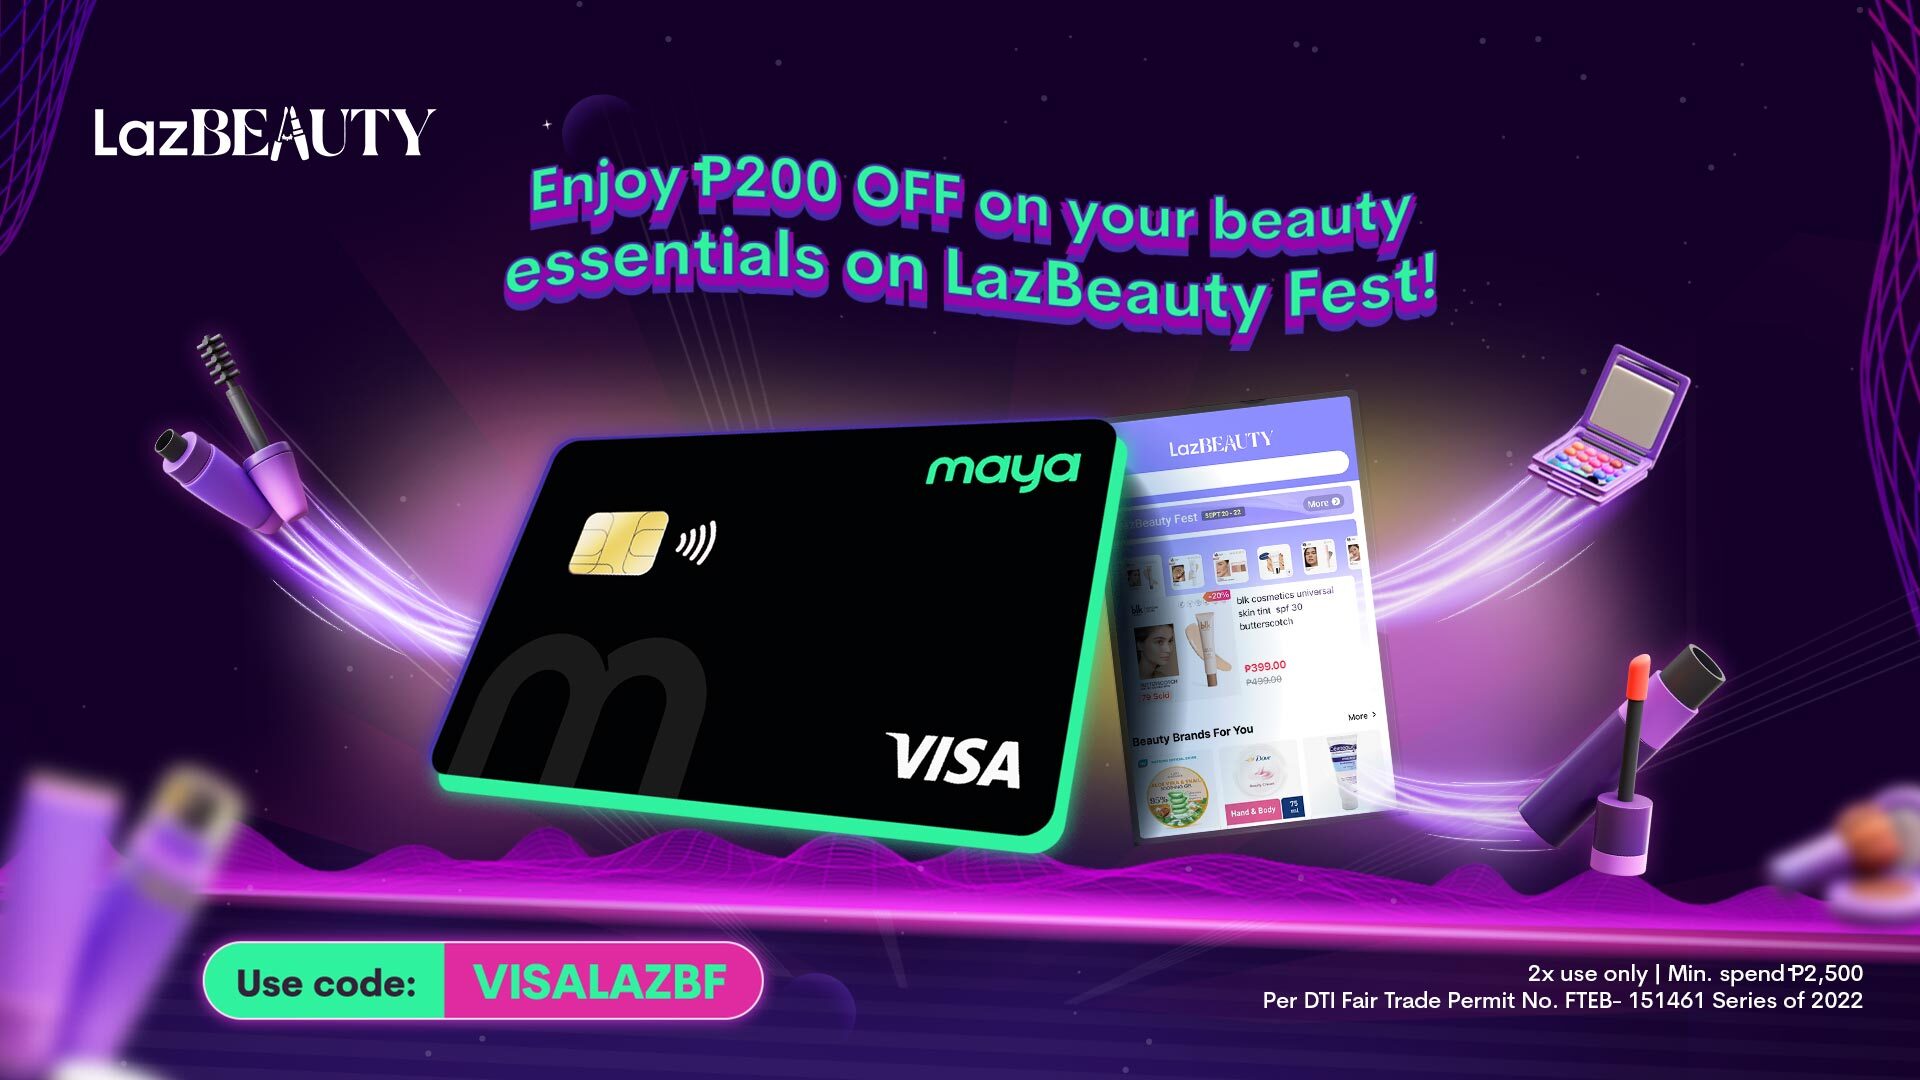 Enjoy P200 OFF on your Beauty essentials on Lazada Beauty Fest!